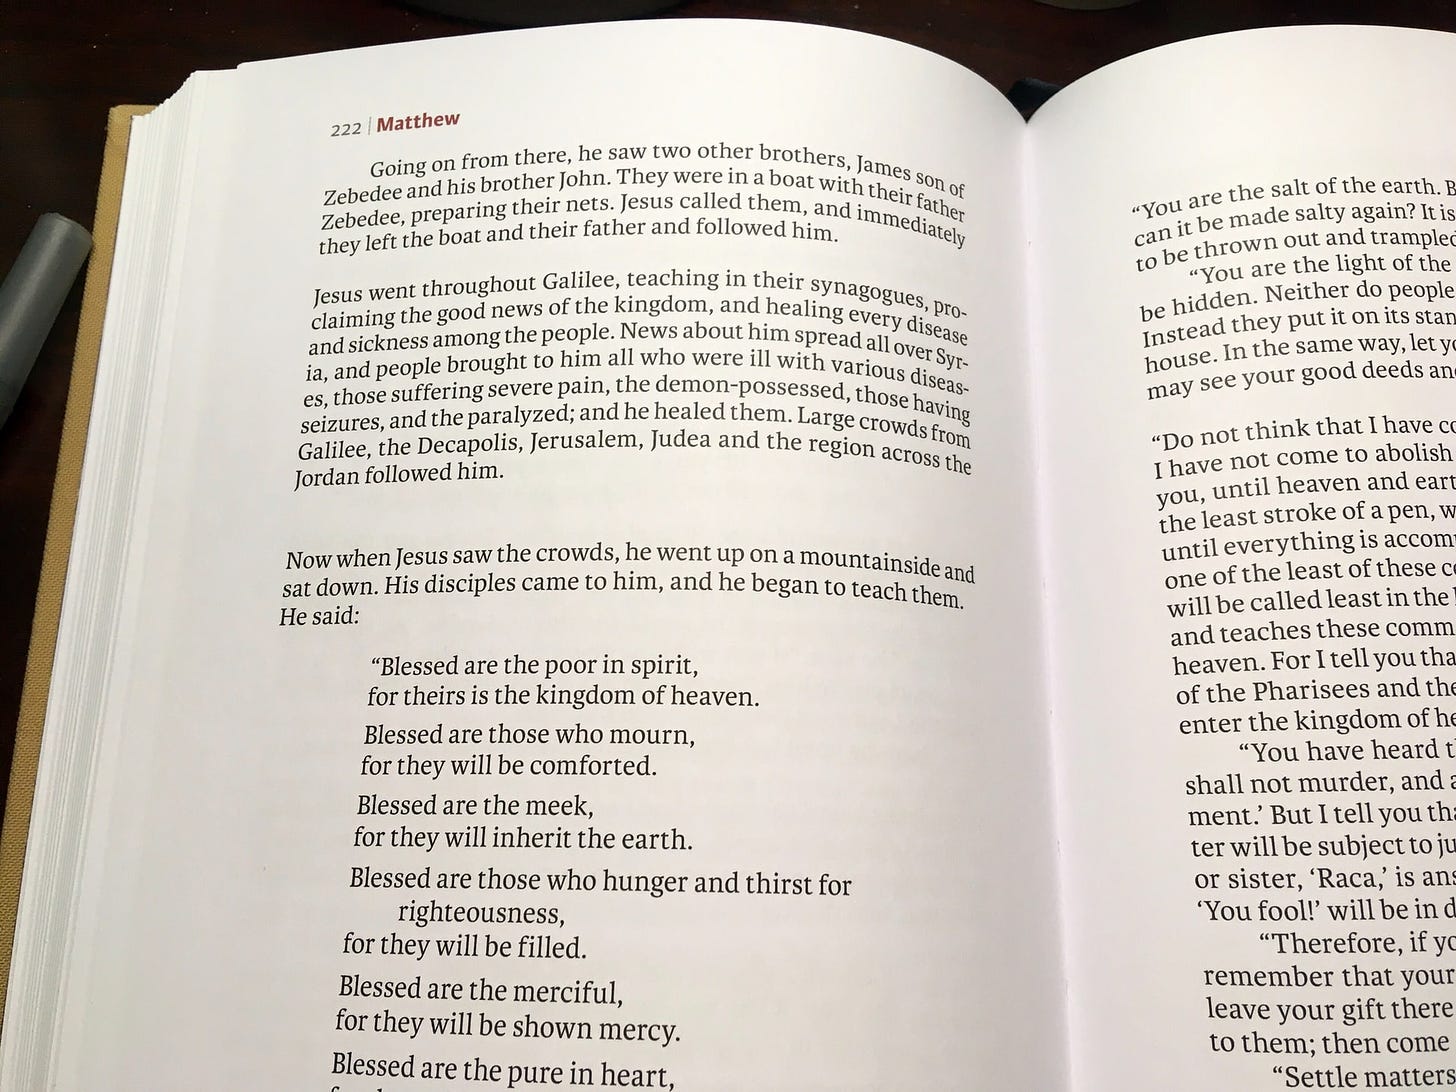 A reader's Bible open to the "Beatitudes" in Matthew's Gospel: "Blessed are the poor in spirit..."